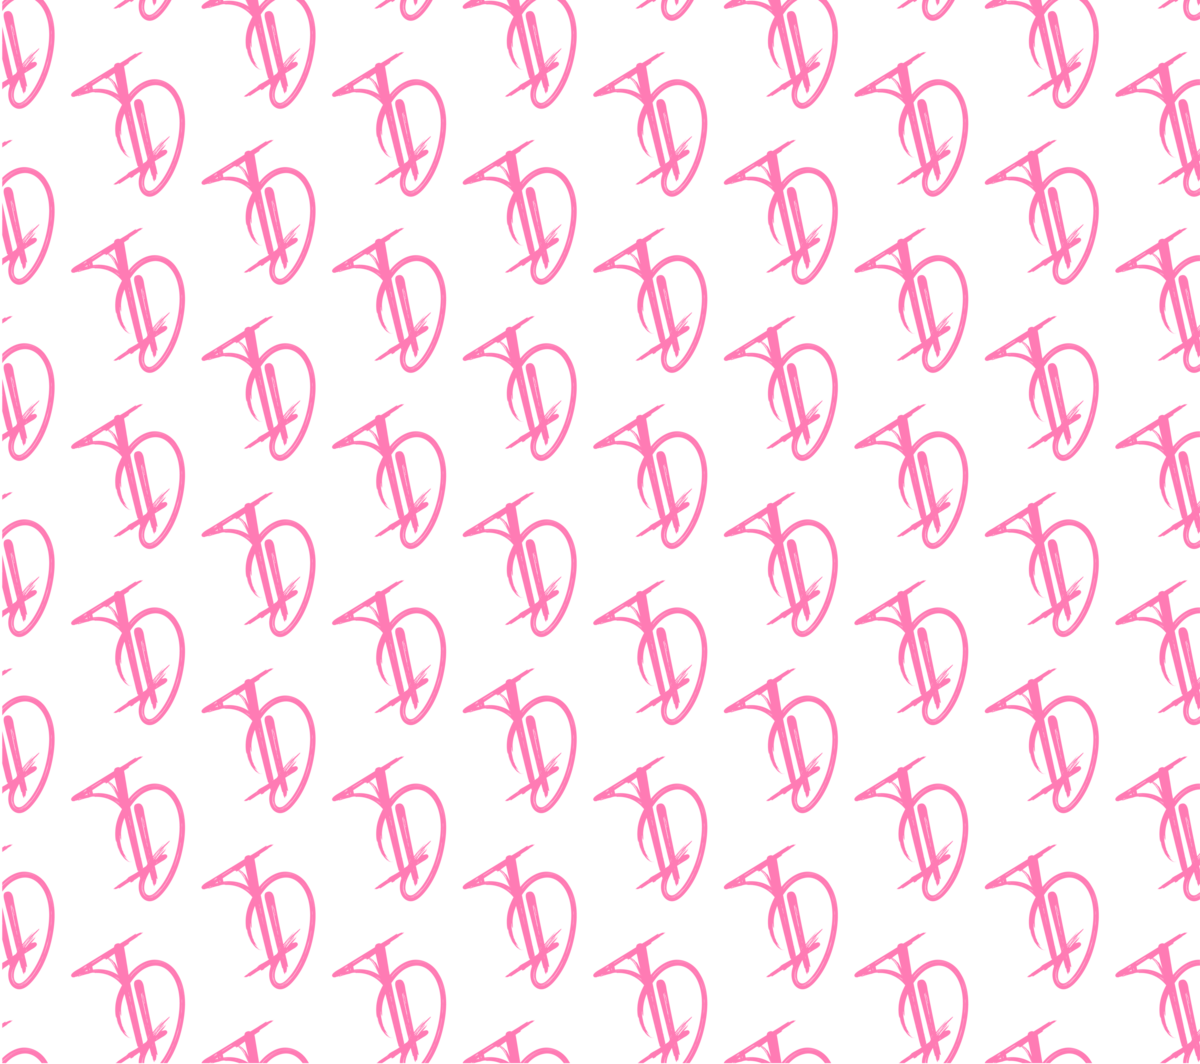 Pink pattern ID background graphic for branding